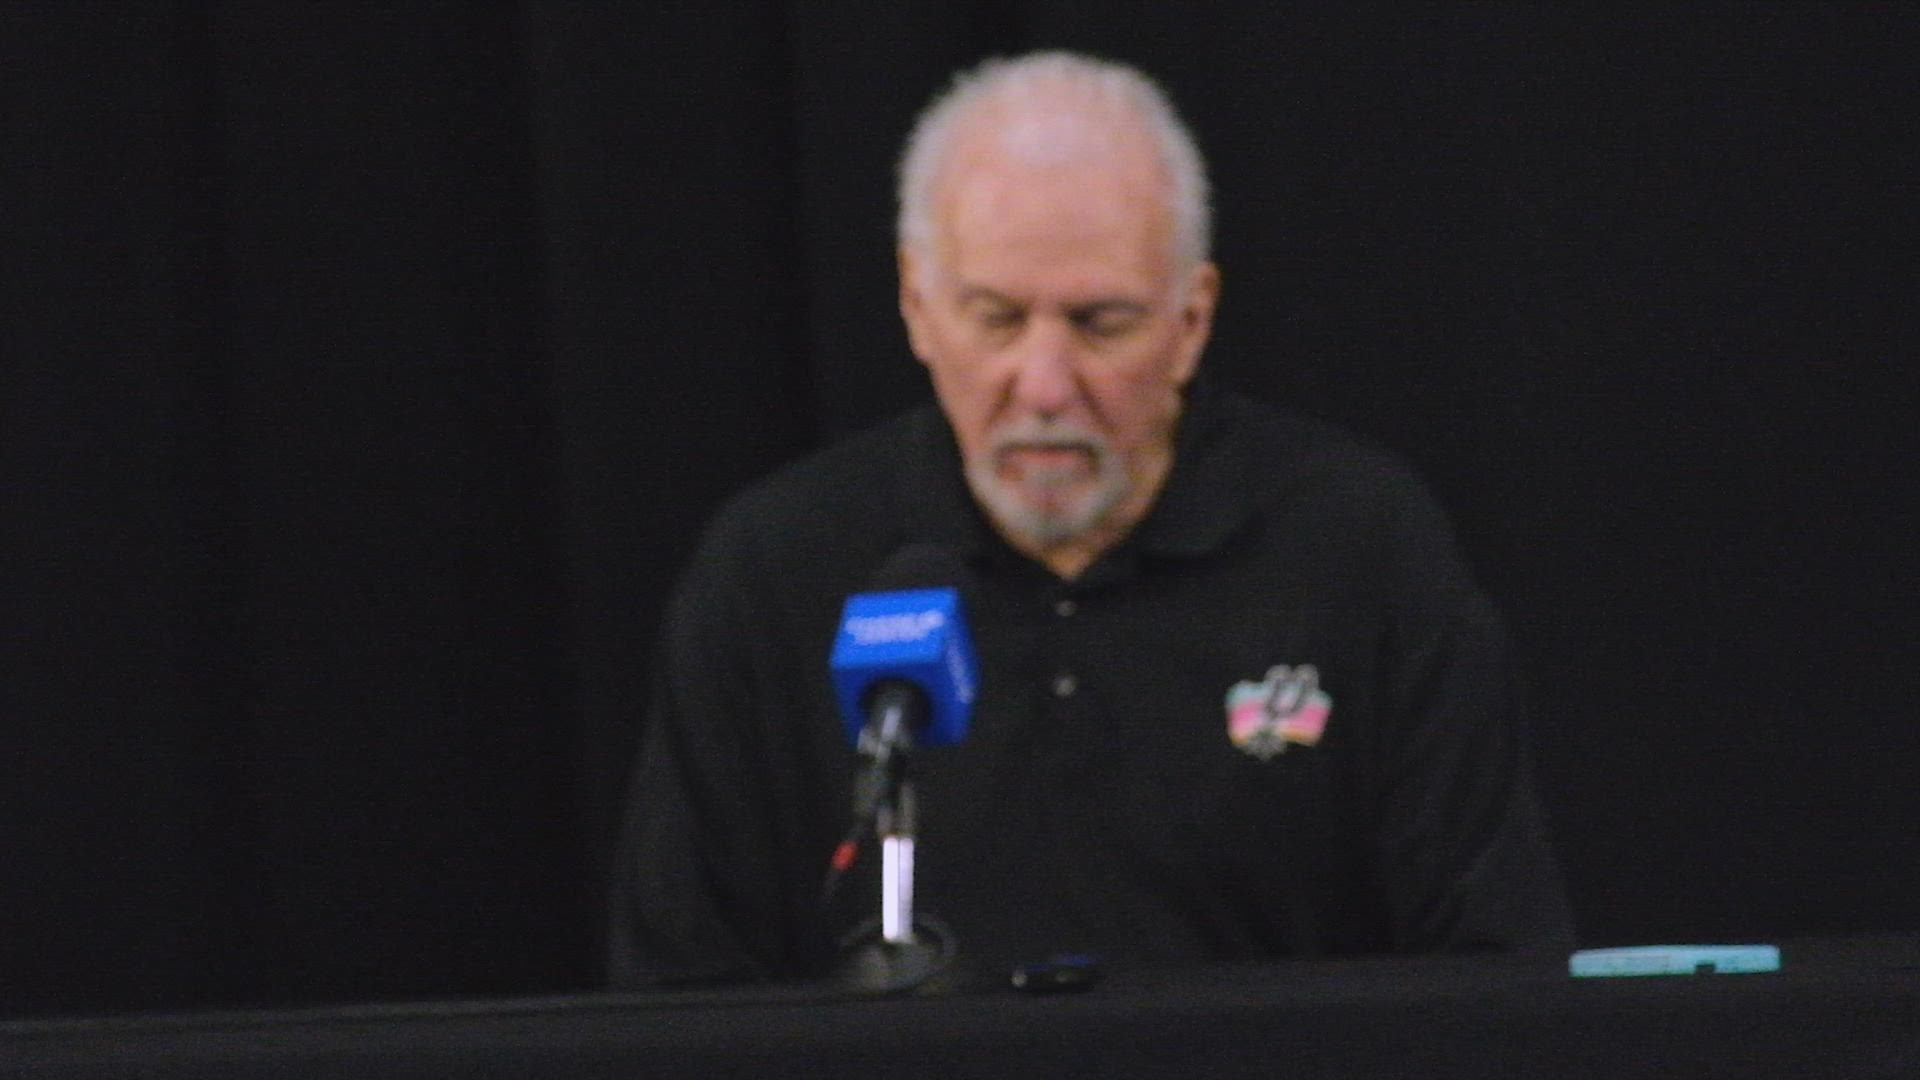 Popovich lauded his team's fight, and gave props to Keldon Johnson and Josh Richardson for the big plays they made.